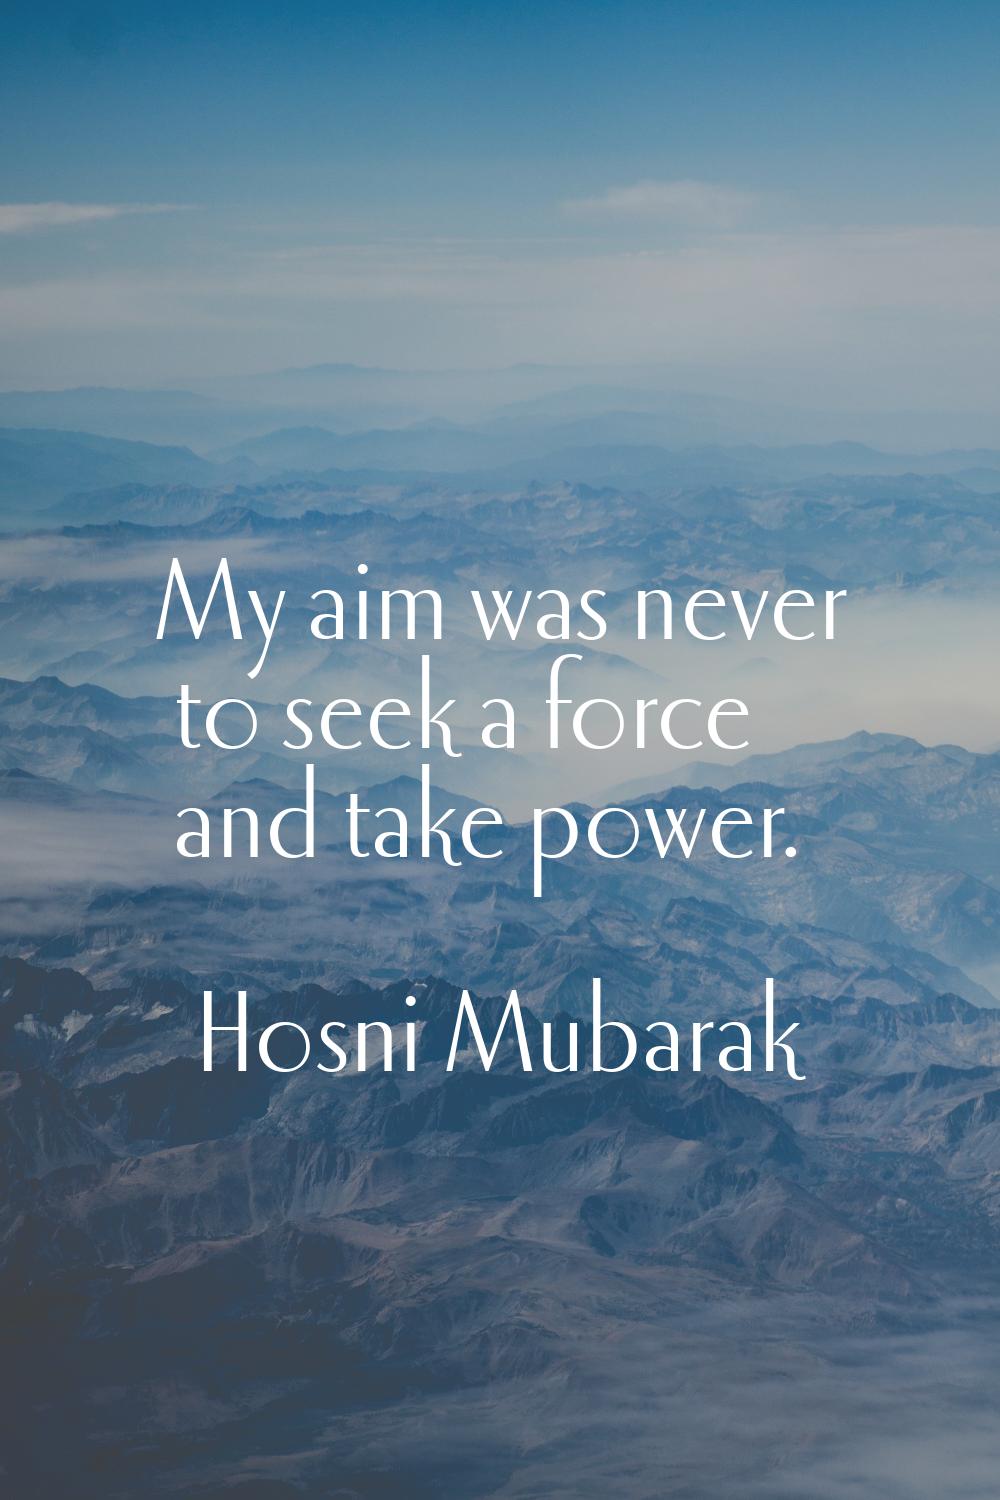 My aim was never to seek a force and take power.